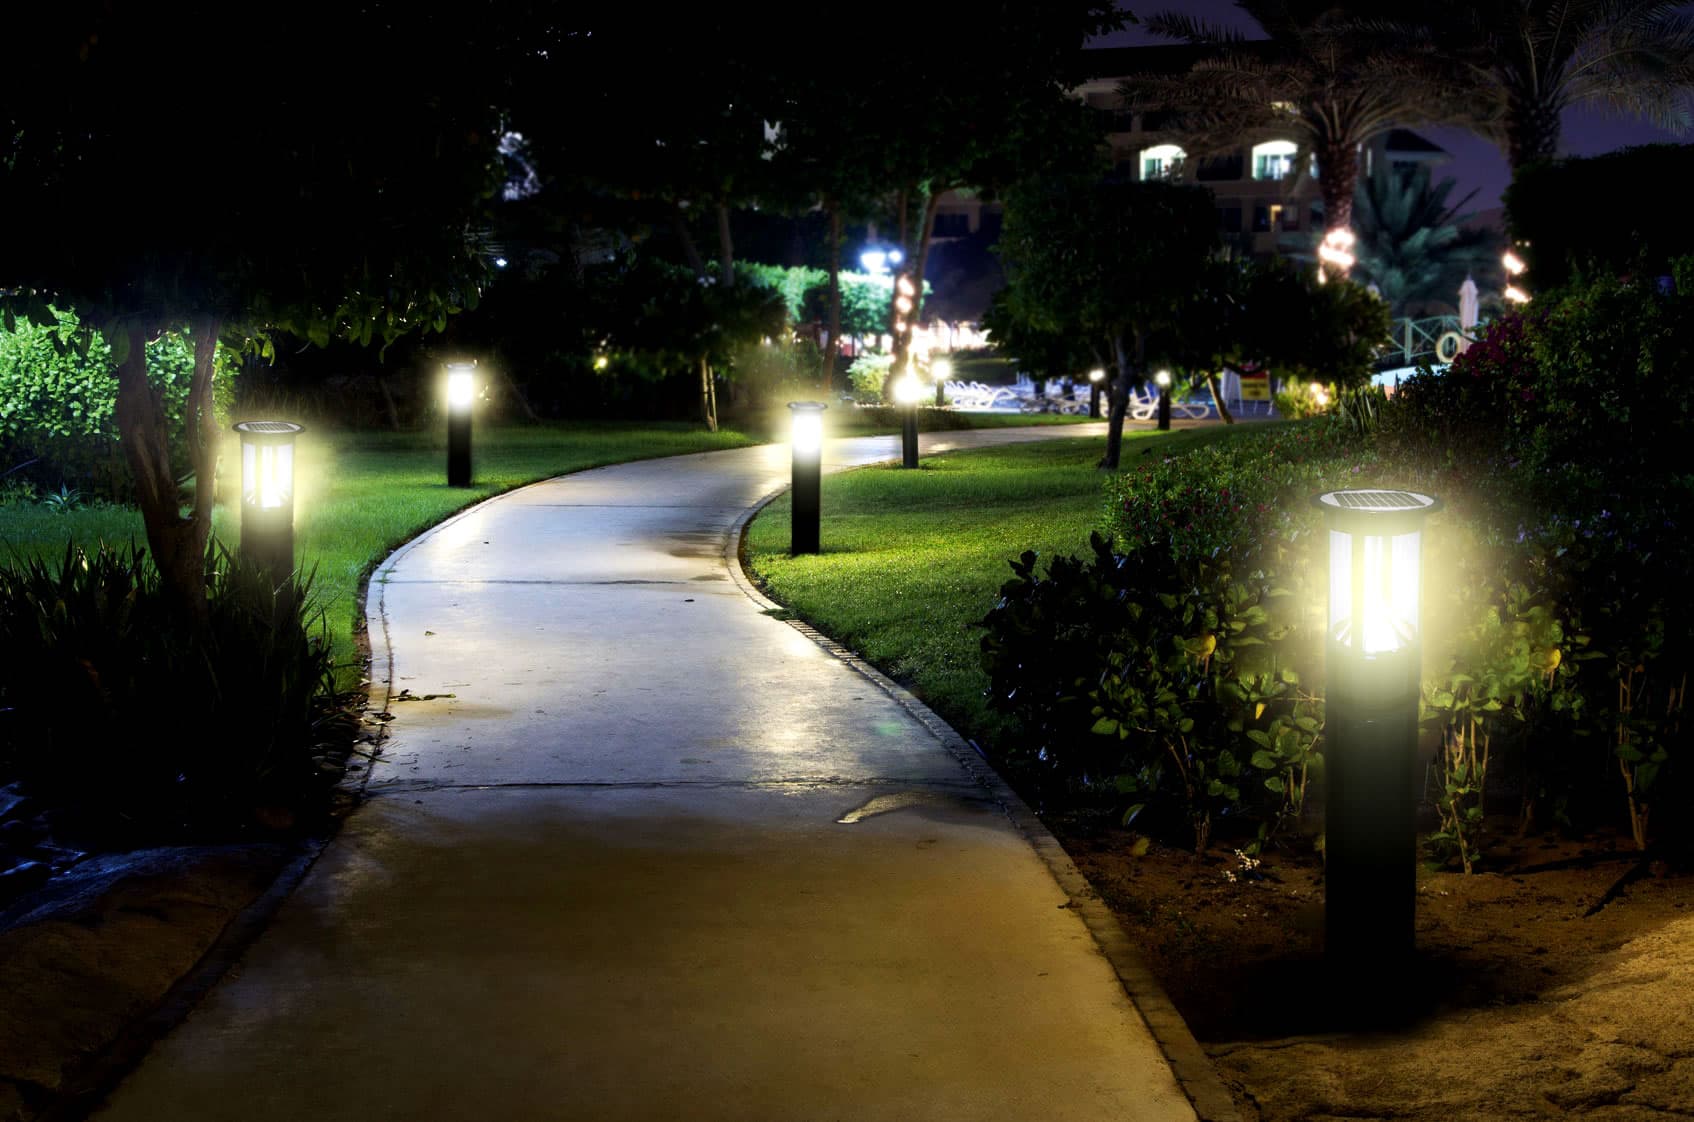 What do you have to assess when you plan to buy solar bollard lights?